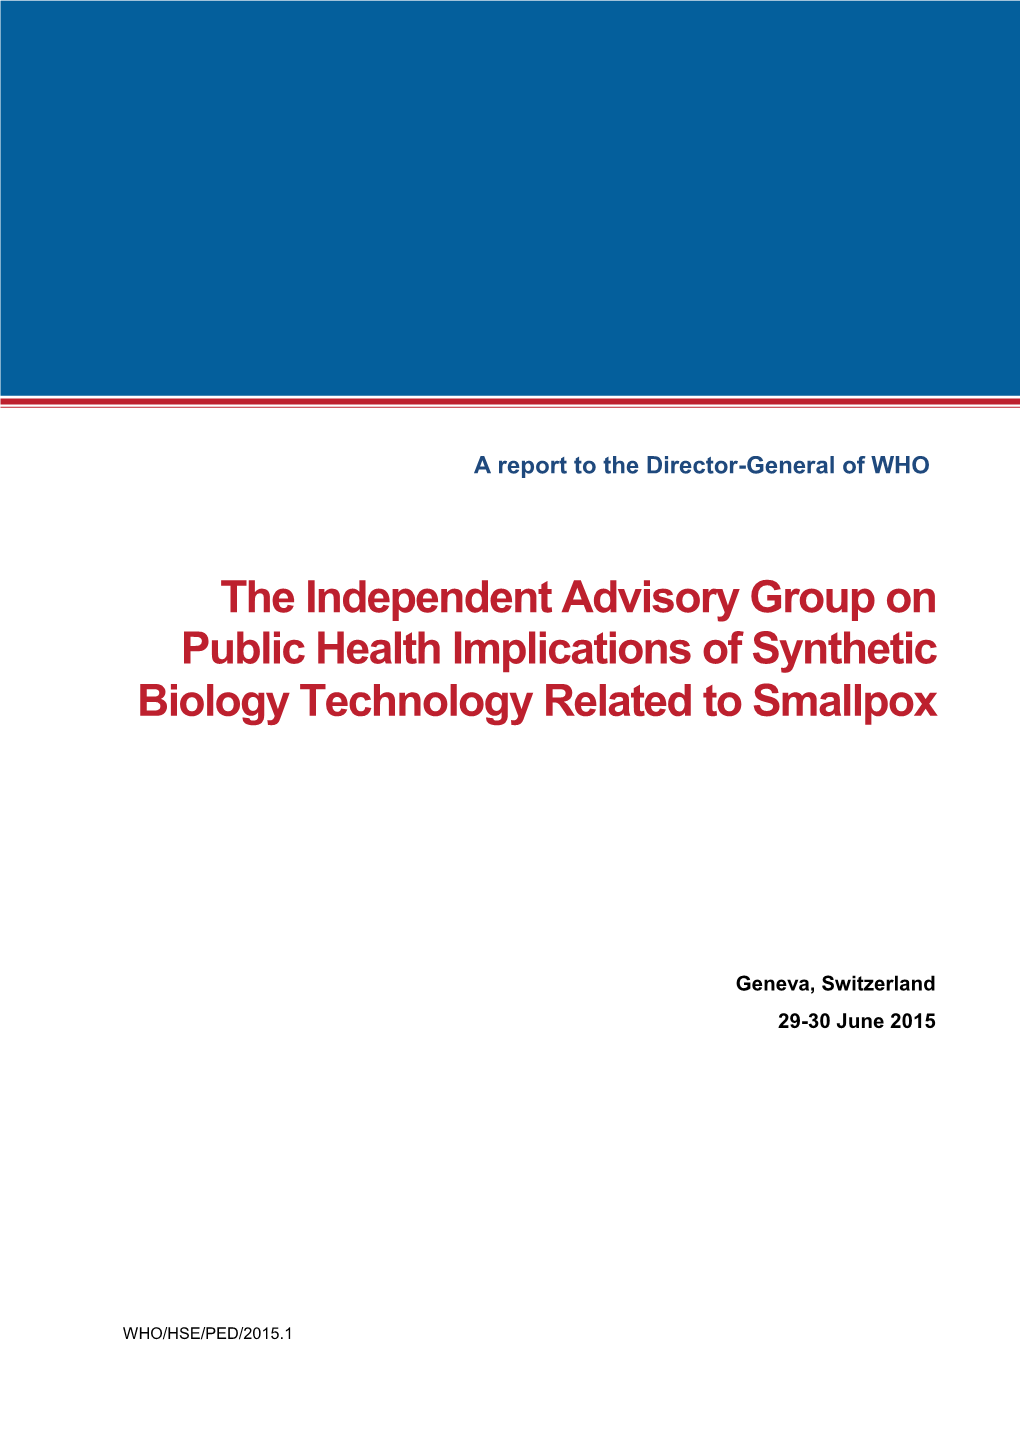 The Independent Advisory Group on Public Health Implications of Synthetic Biology Technology Related to Smallpox